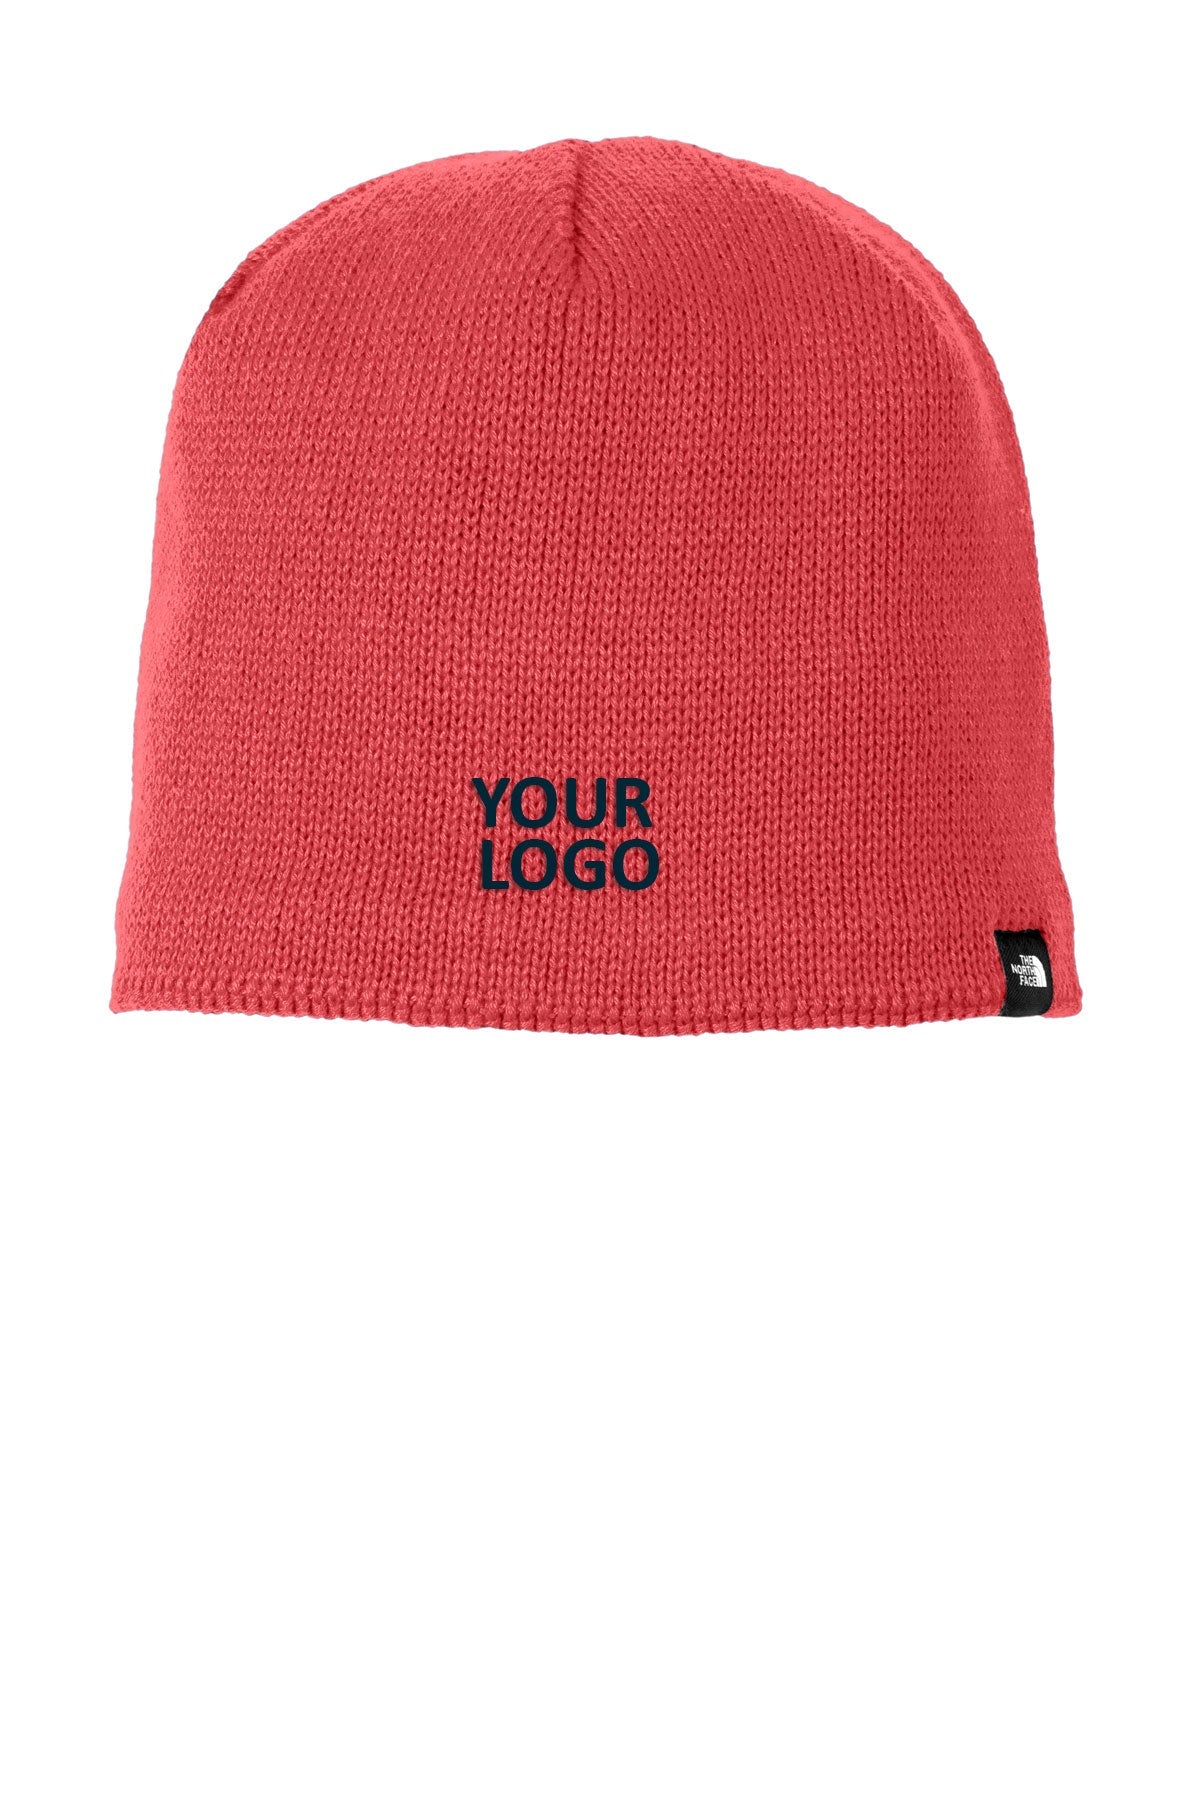 The North Face Cardinal Red NF0A4VUB The-North-Face-Mountain-Beanie-NF0A4VUB-Cardinal-Red